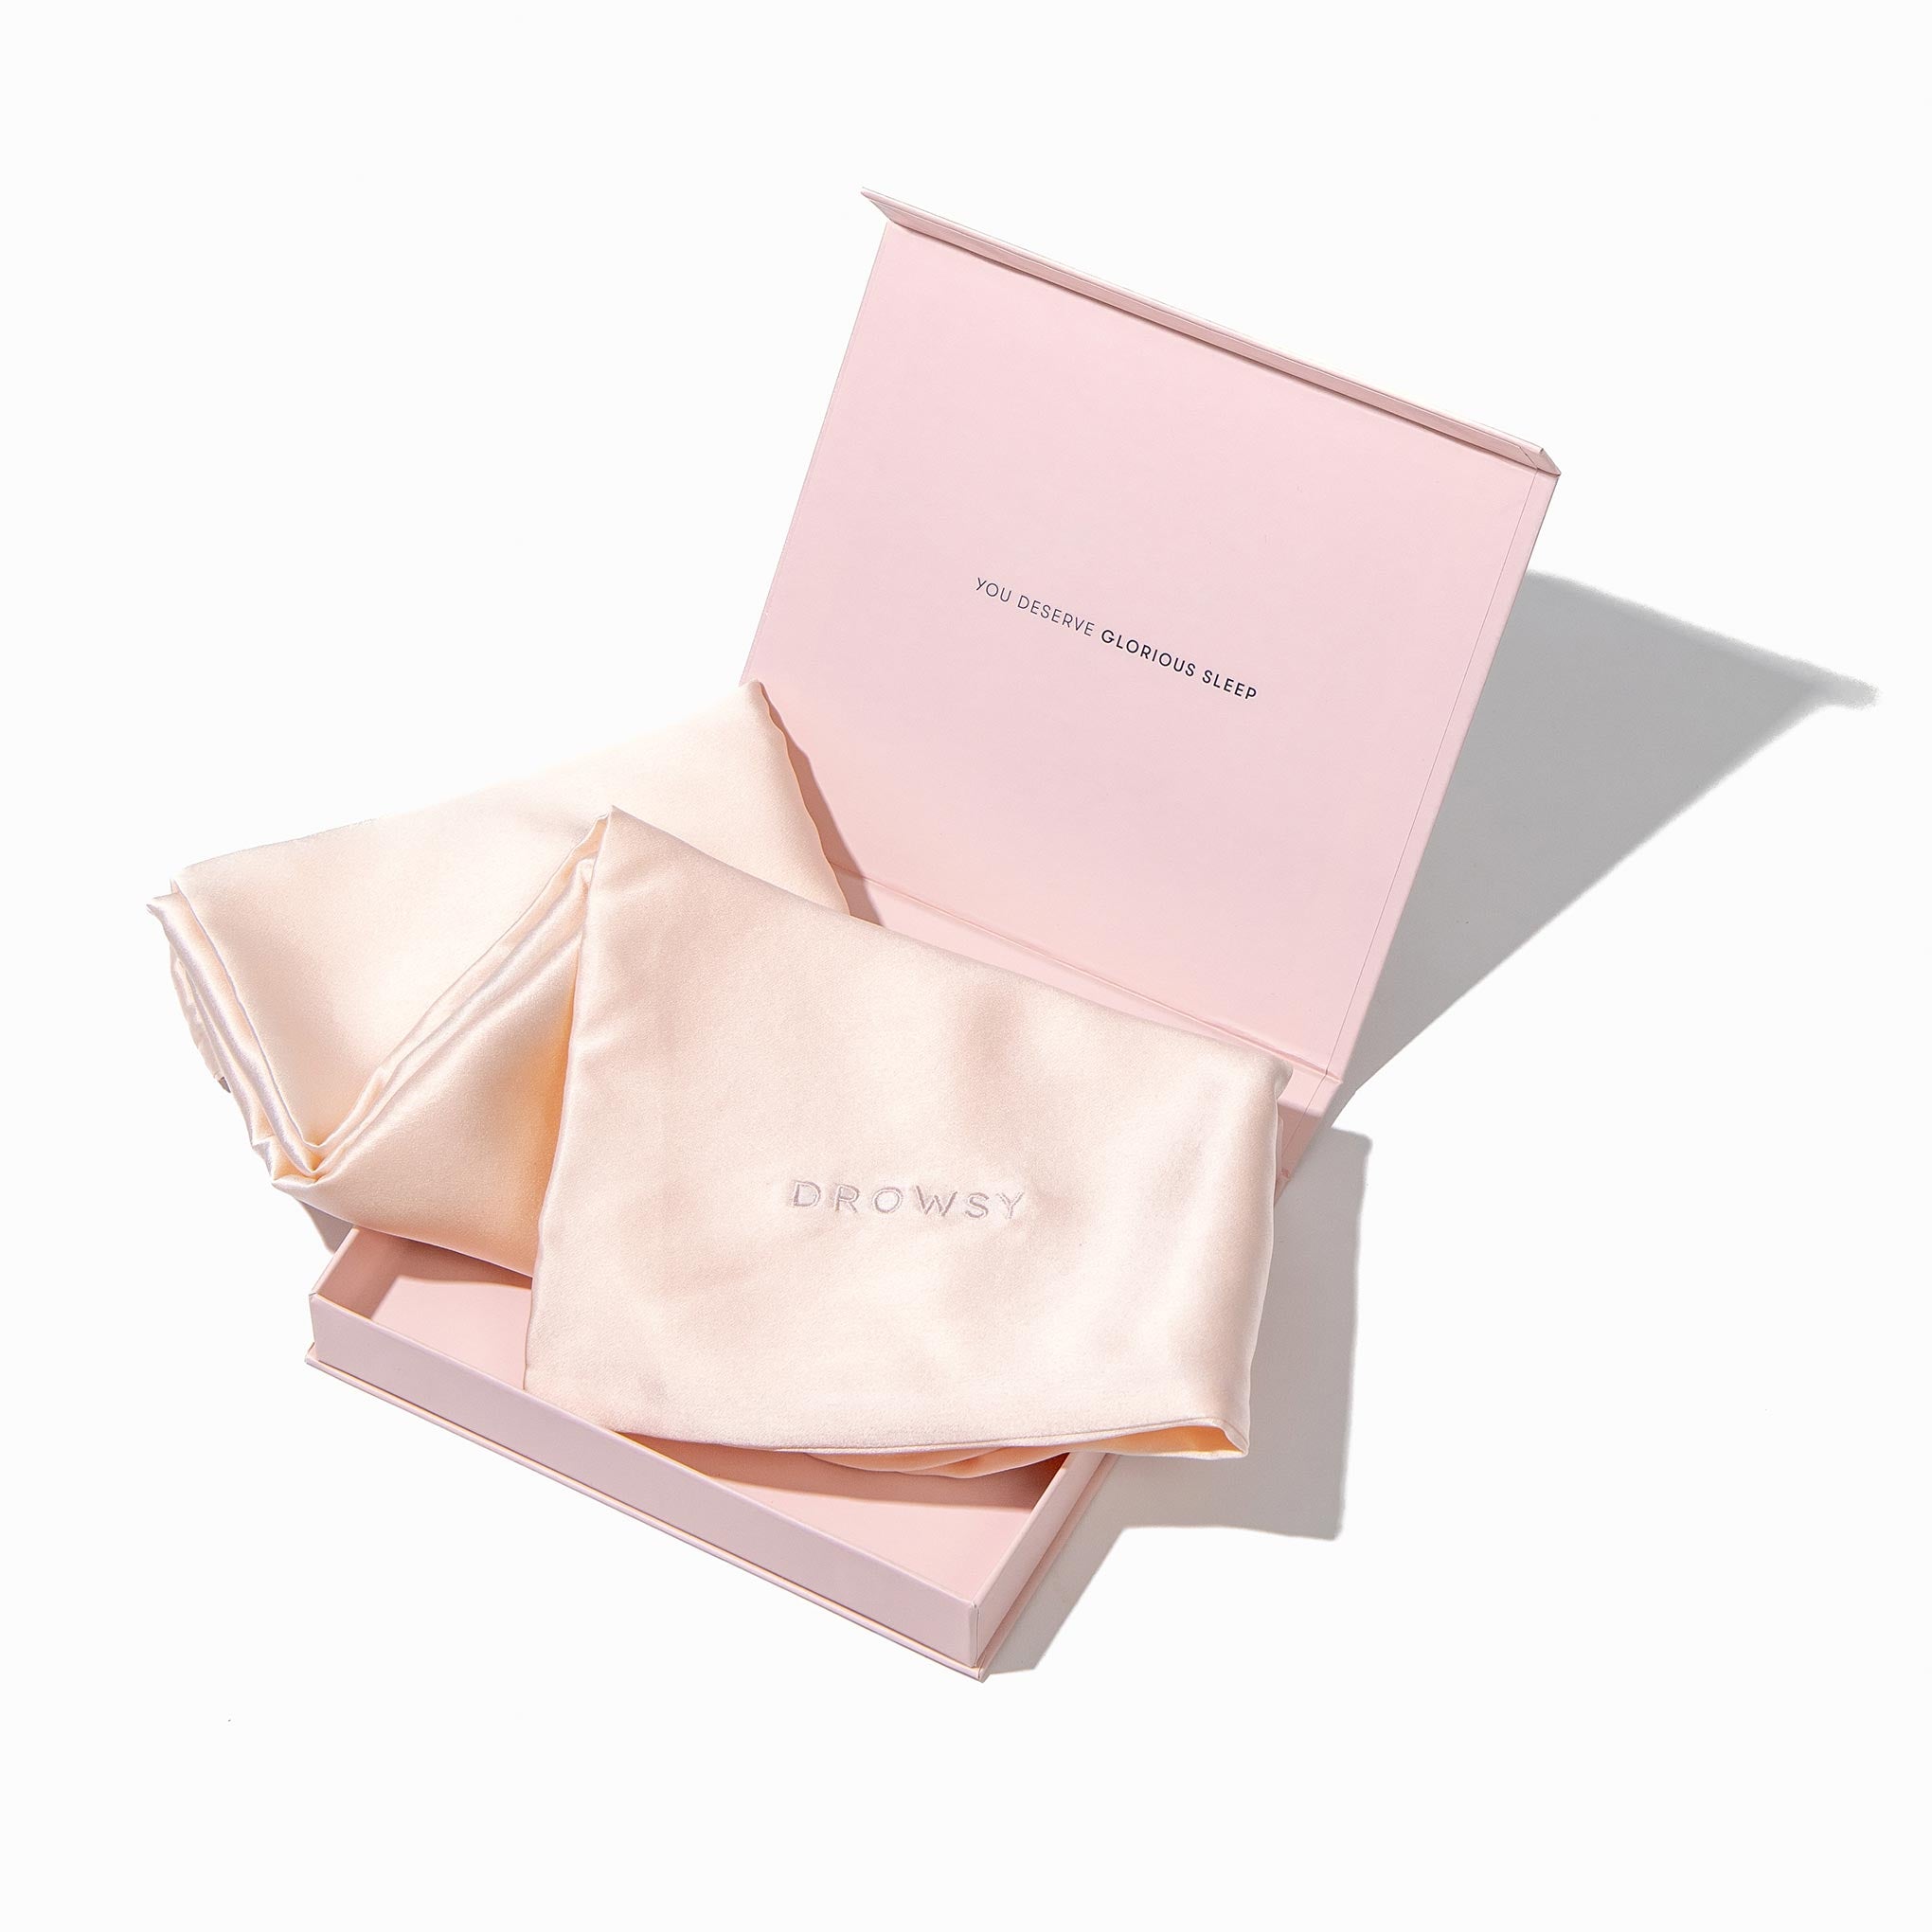 Baby pink pillowcase box opening with baby pink silk pillowcase inside